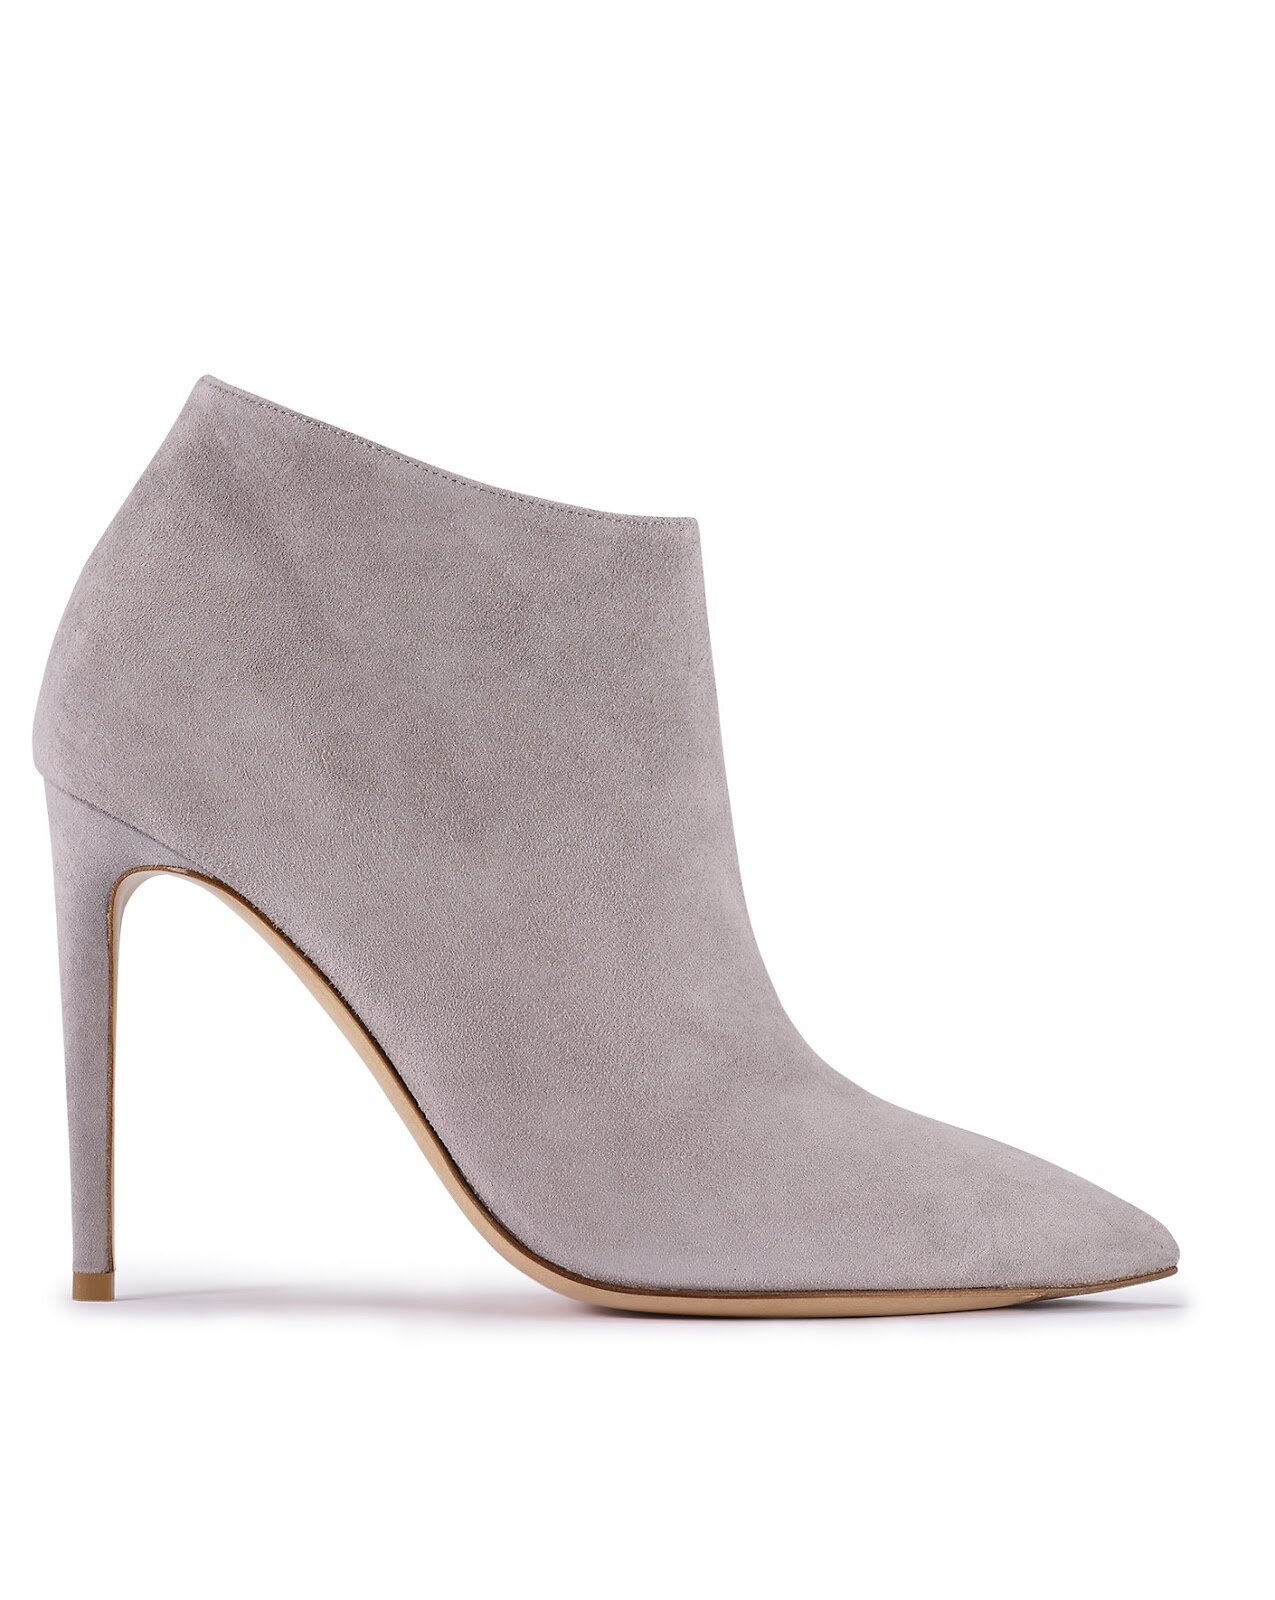 Ralph Lauren Naima Ankle Boots in Brown — UFO No More